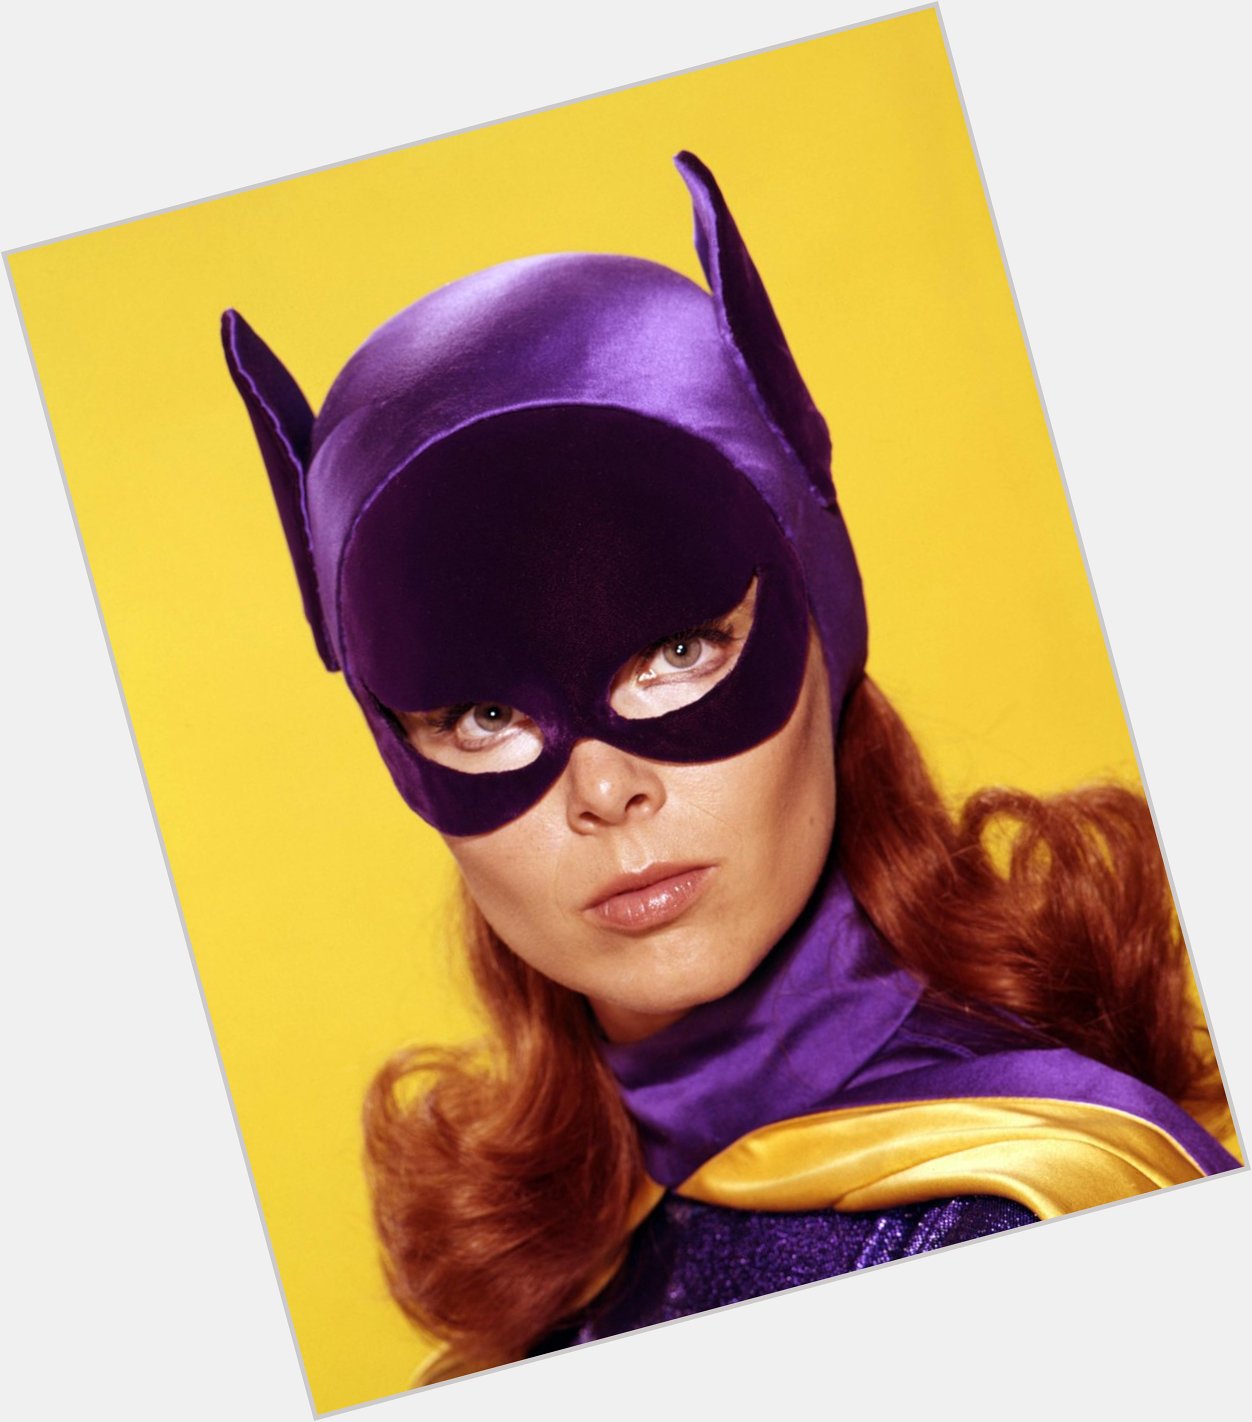 Happy Birthday Yvonne Craig! Learn more about Yvonne in my interview from a few years ago!  